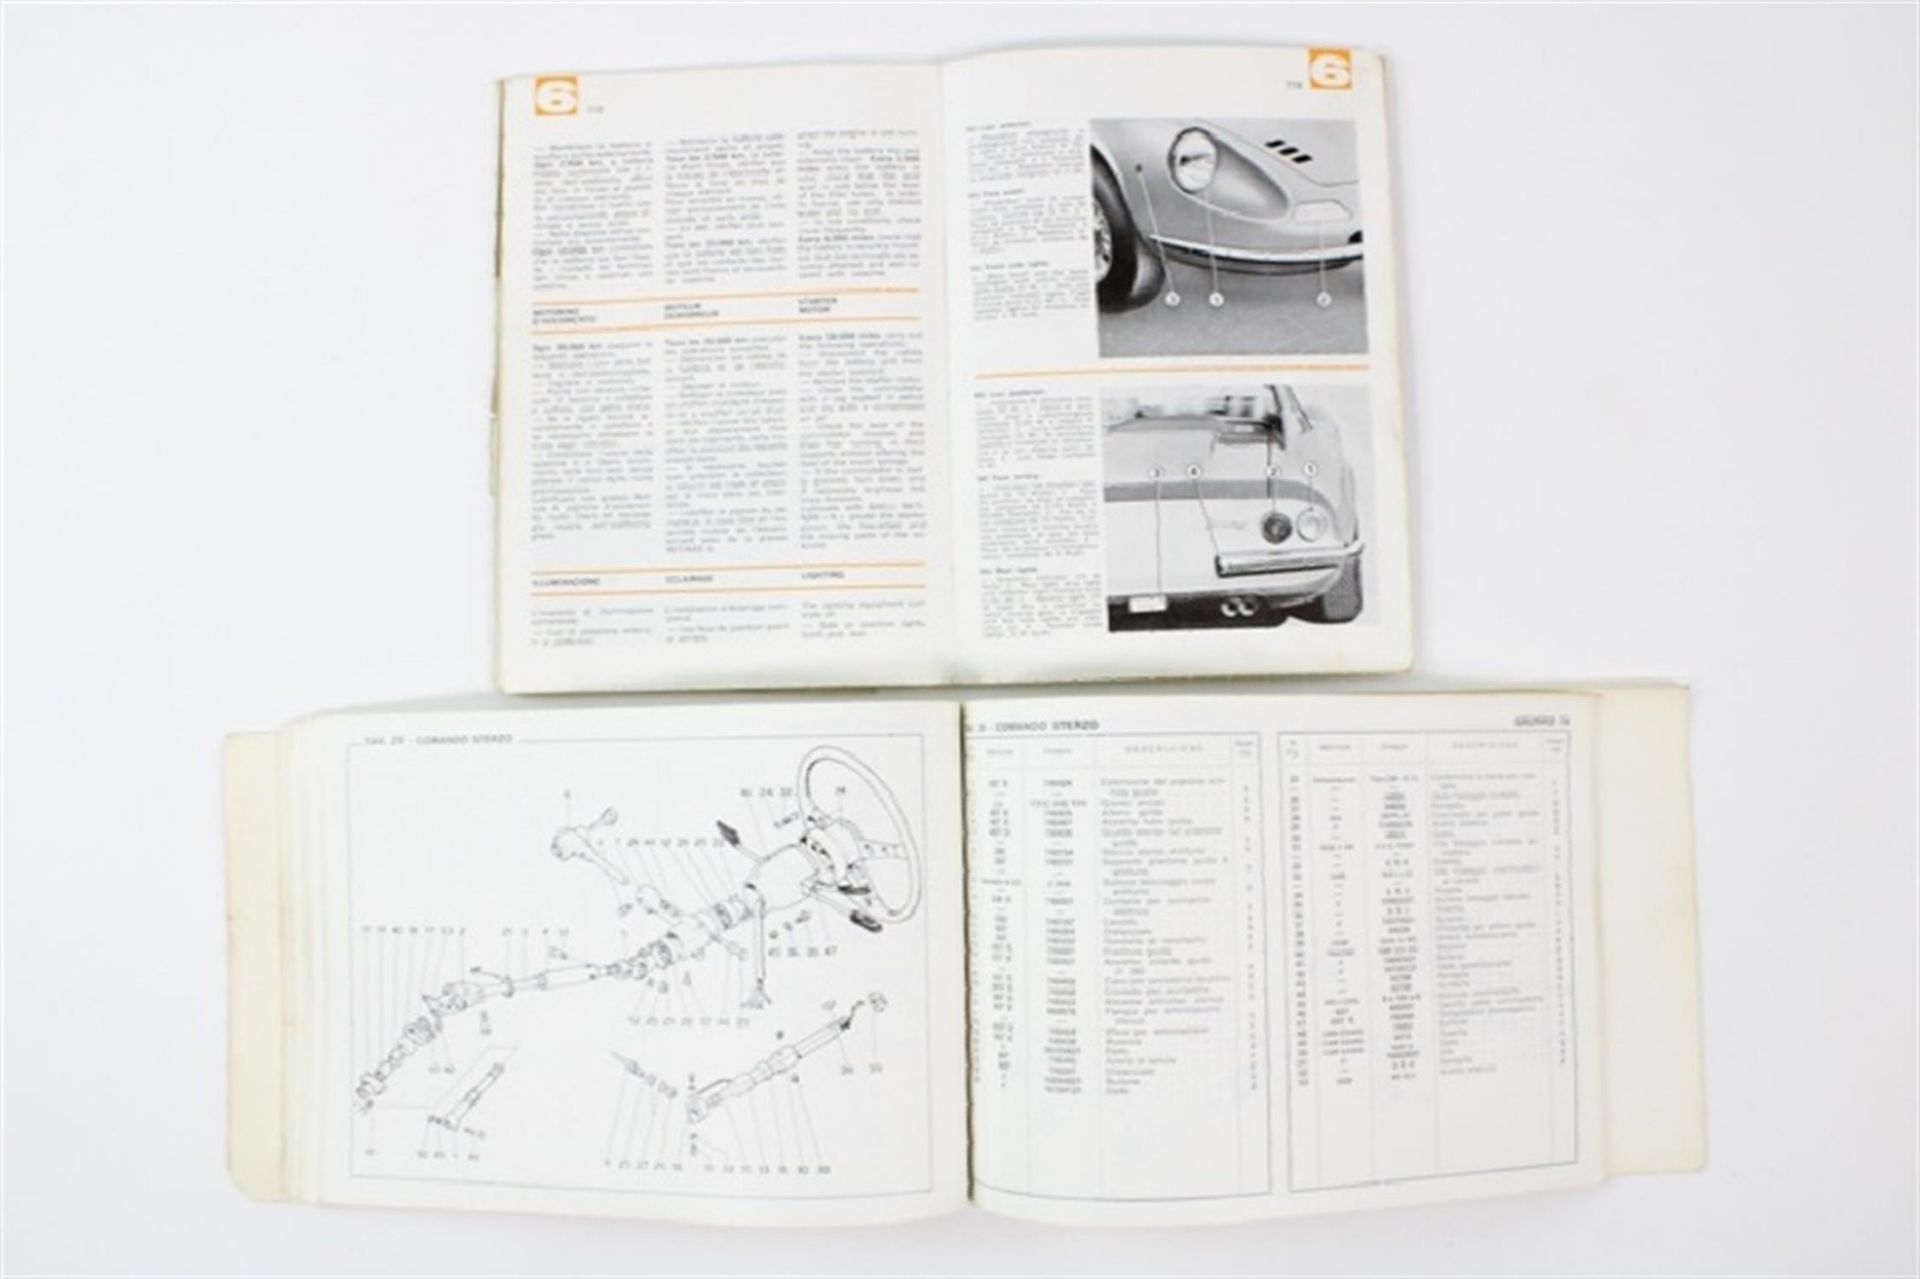 1971 Ferrari 246 Dino Complete Pouch and Manual Set - Image 9 of 10